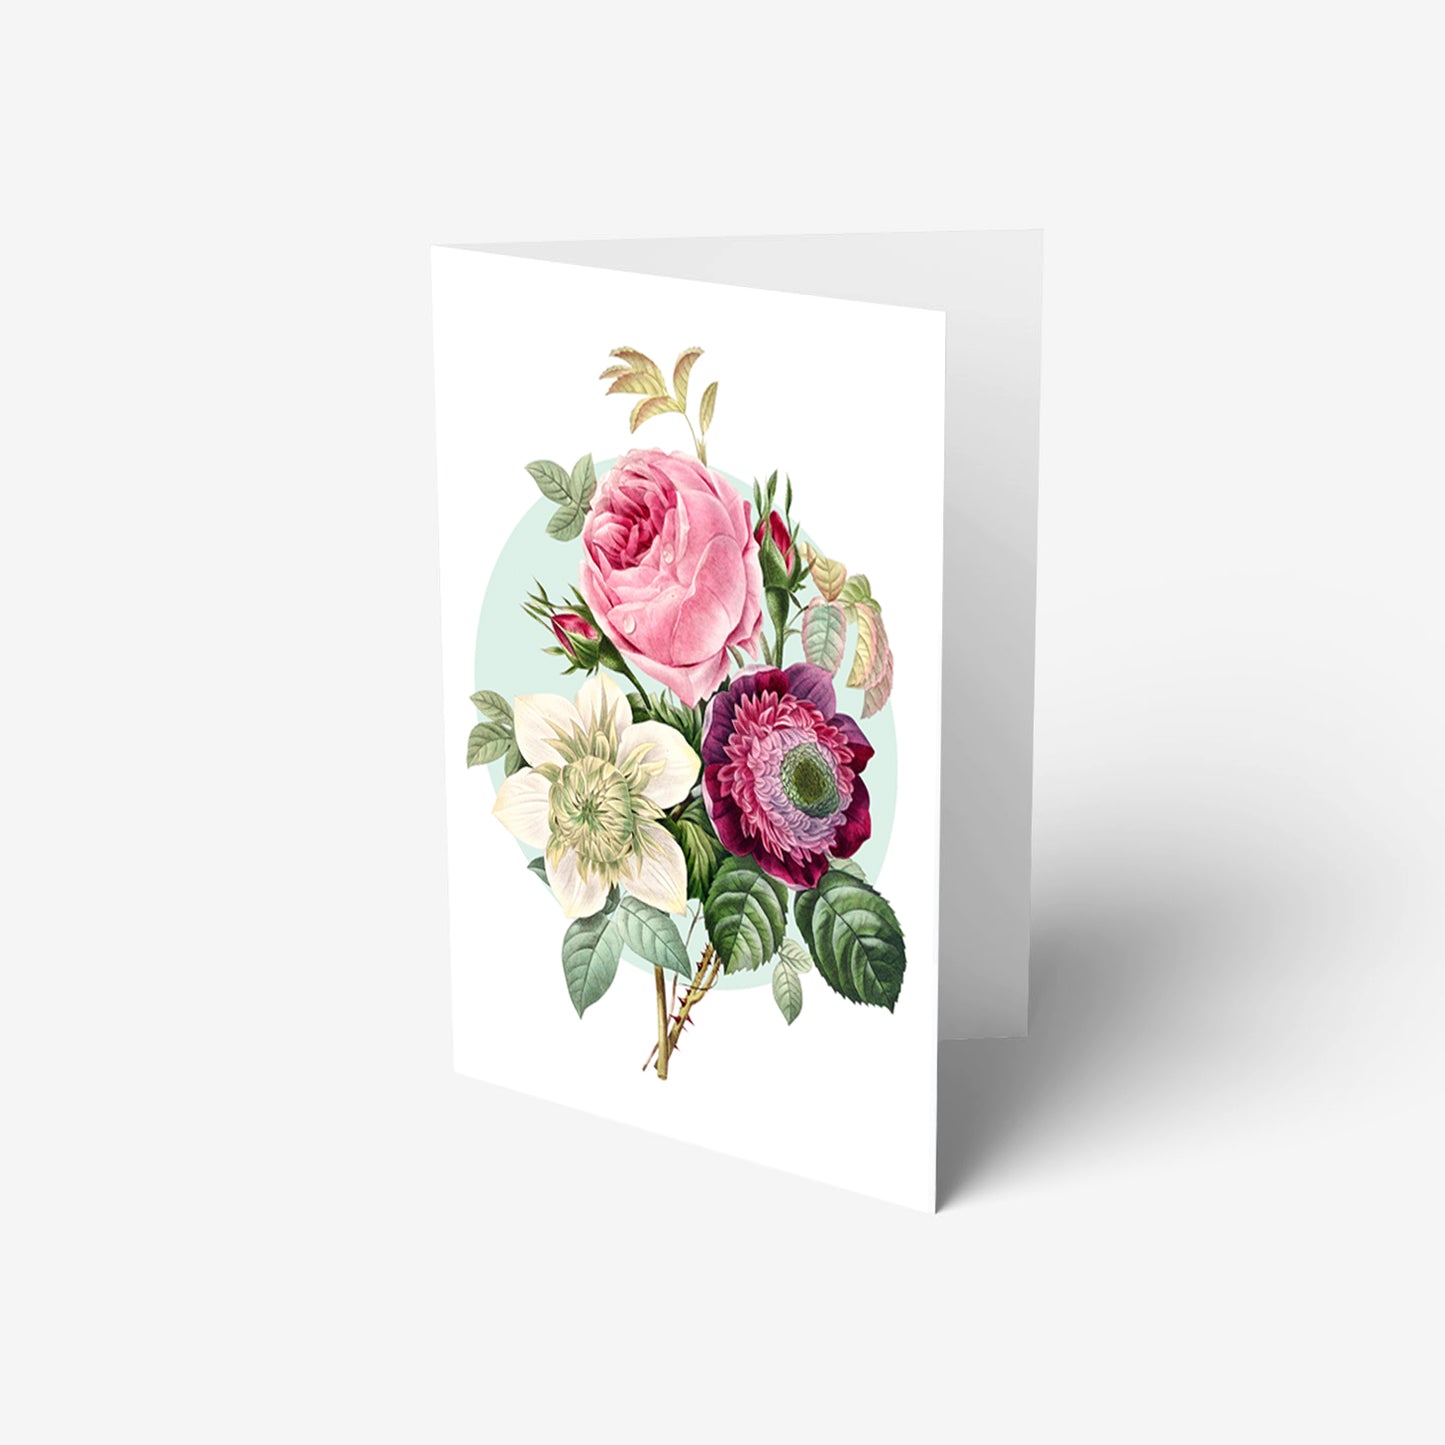 A floral greeting card featuring a stunning botanical illustration